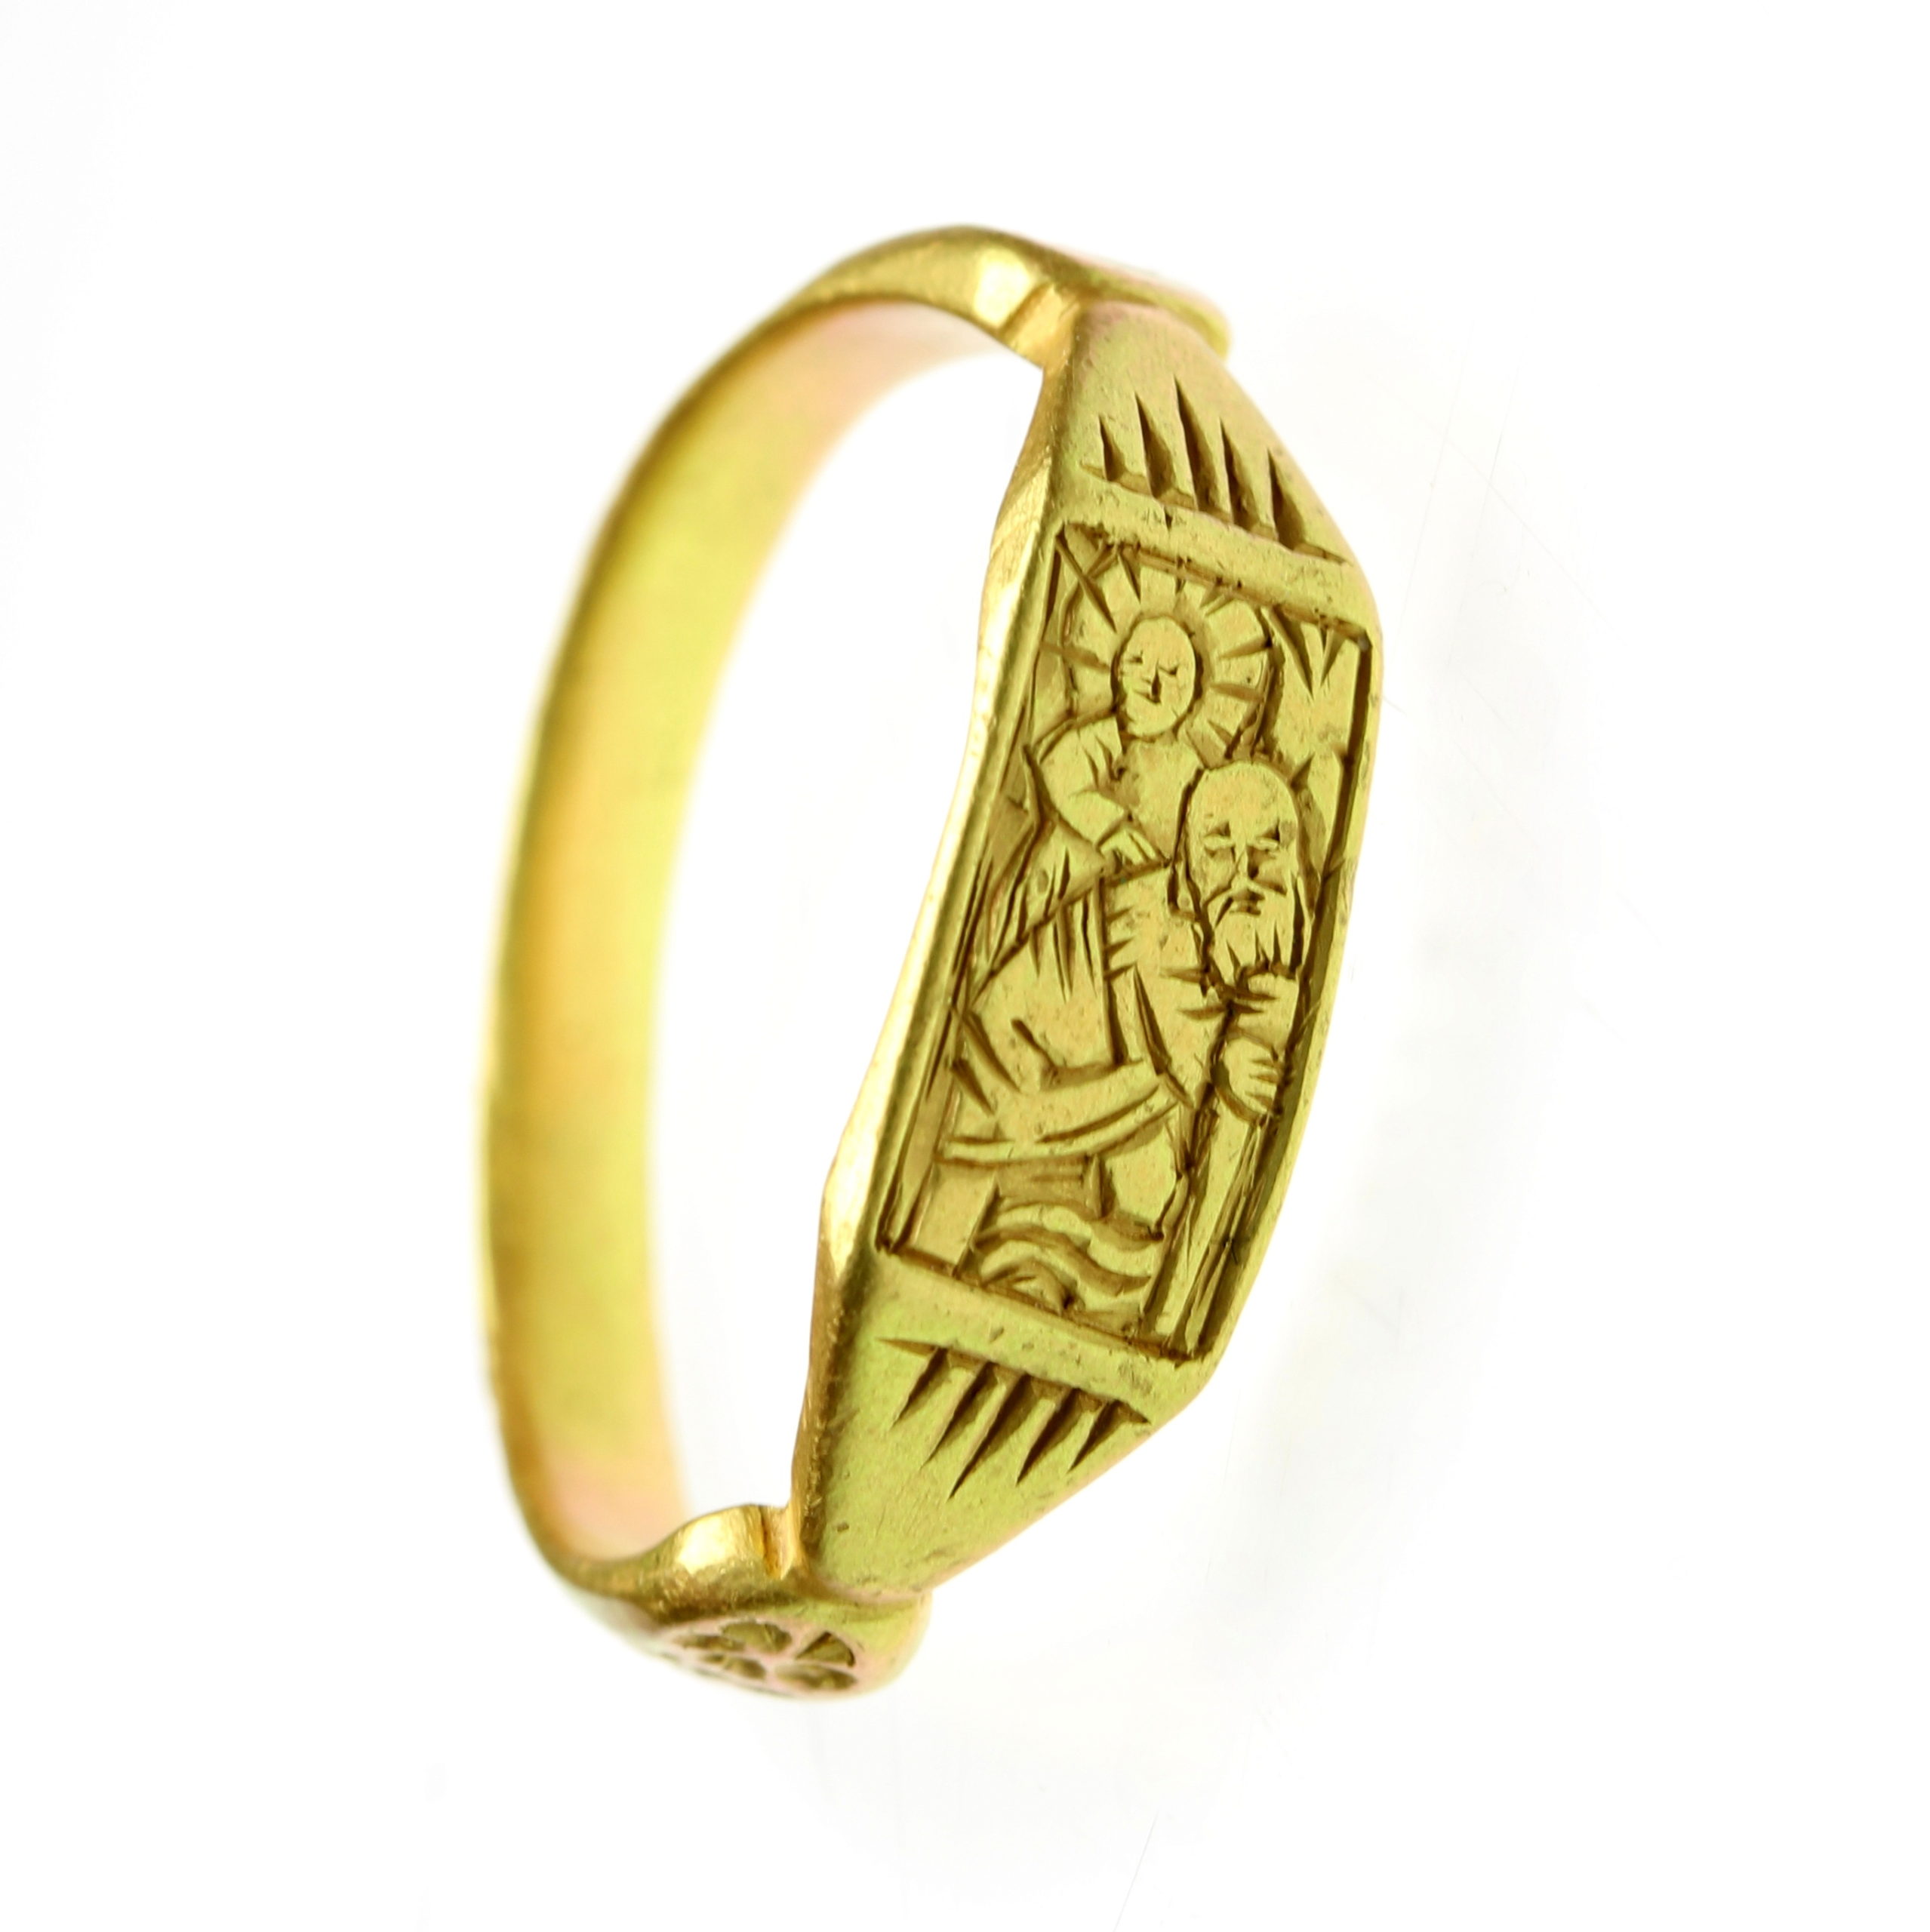 Medieval Gold Iconographic Ring 15th Century AD depicting St